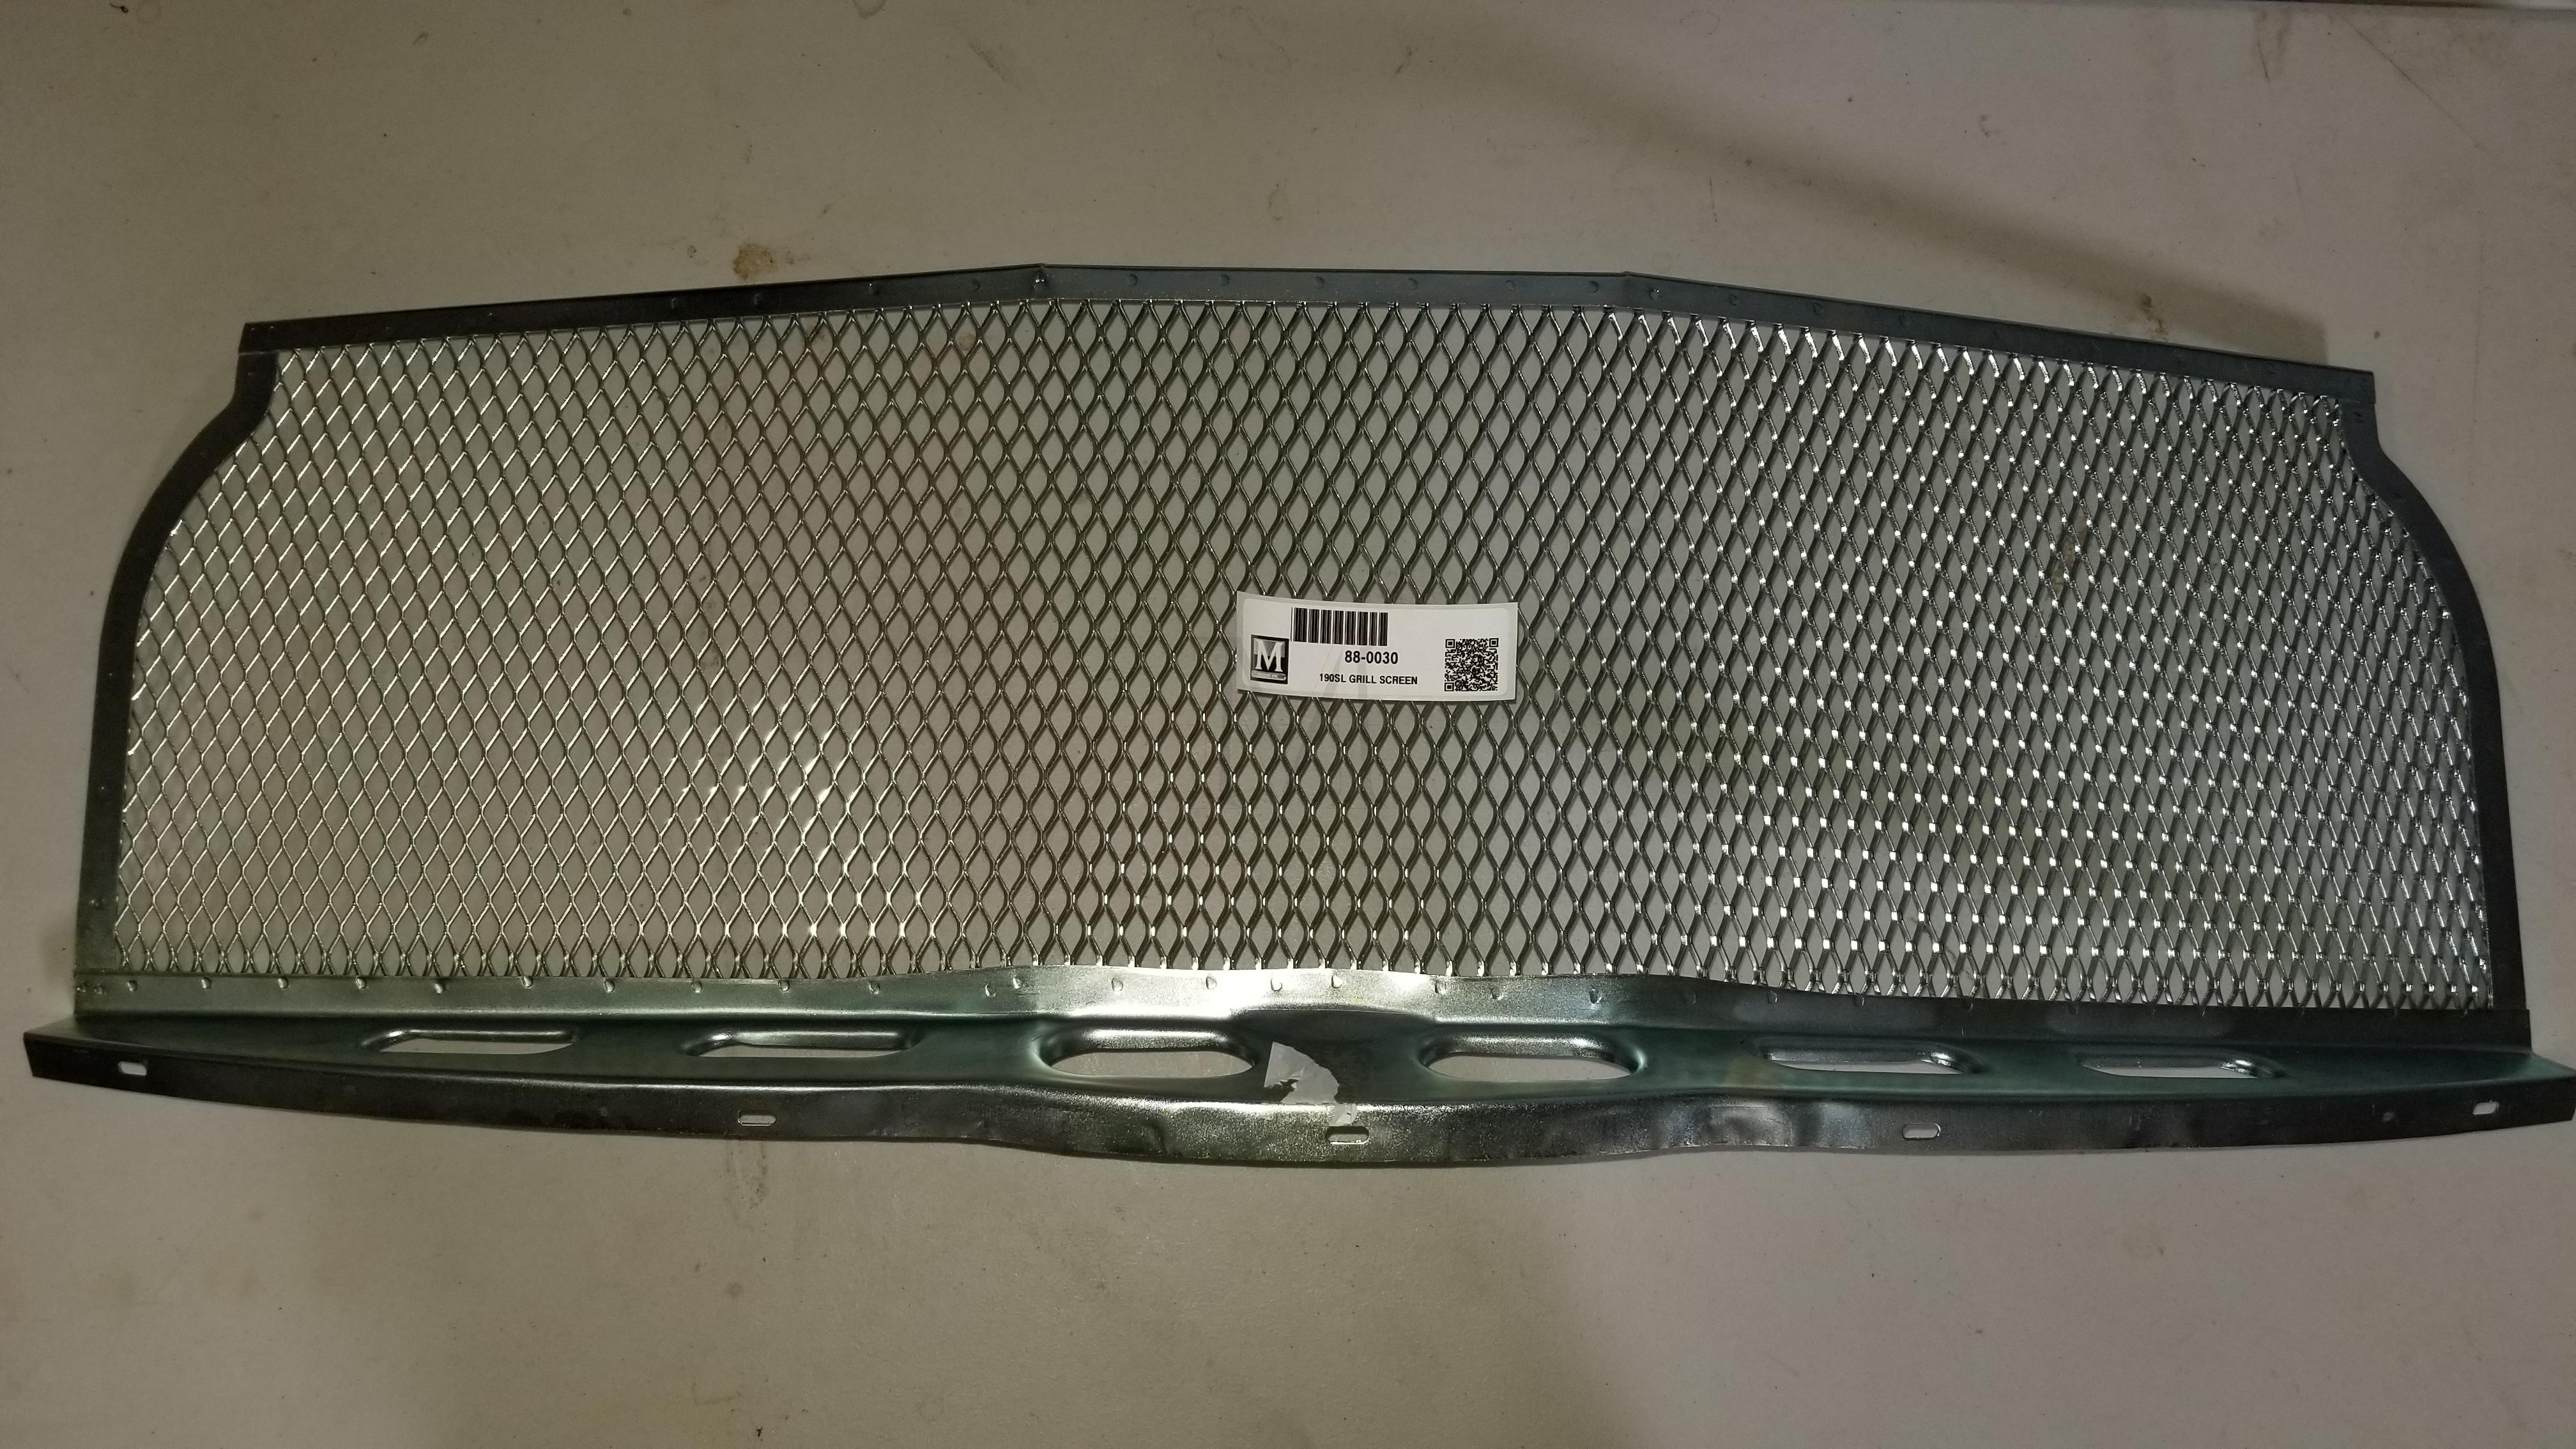 GRILLE MESH SCREEN